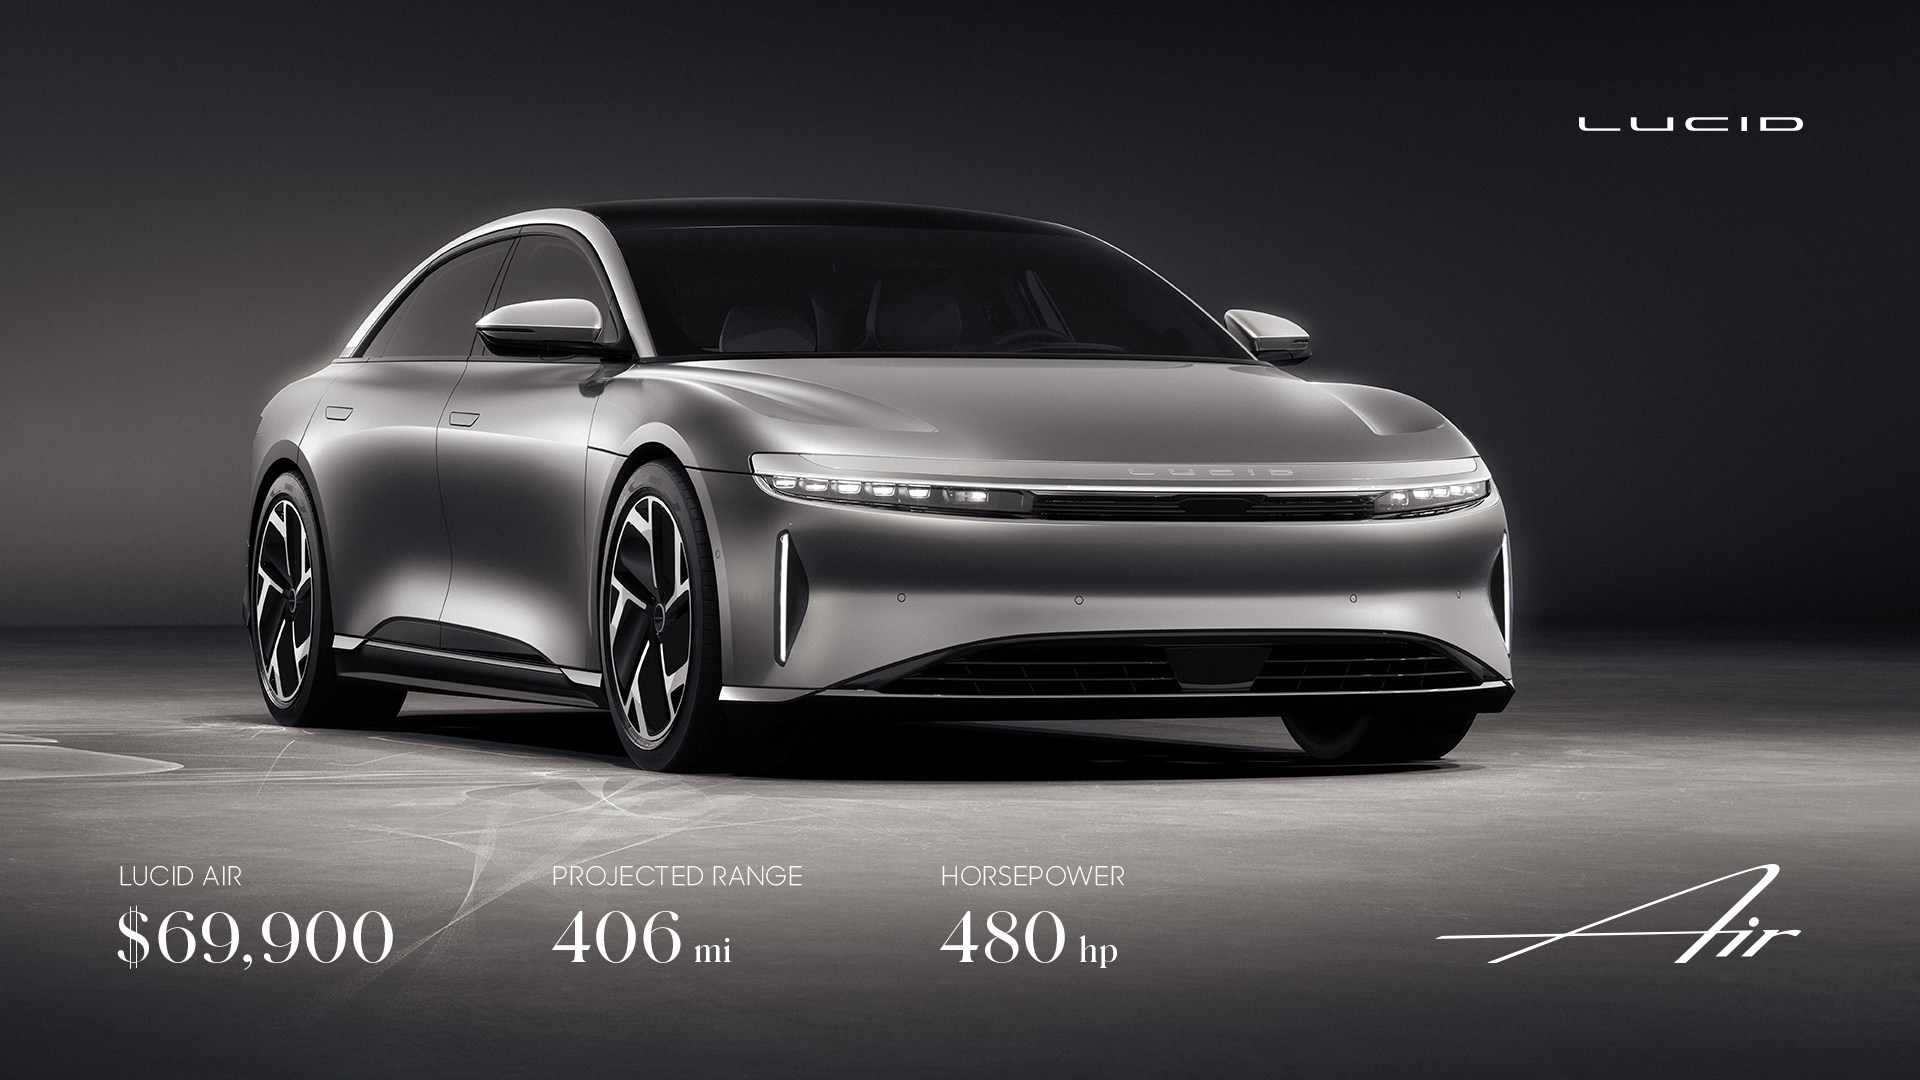 Lucid Motors Expands Luxury EV Lineup with Its Most Attainable Lucid Air Model Yet, Featuring 406 Miles of Range and 480 horsepower from just $69,900